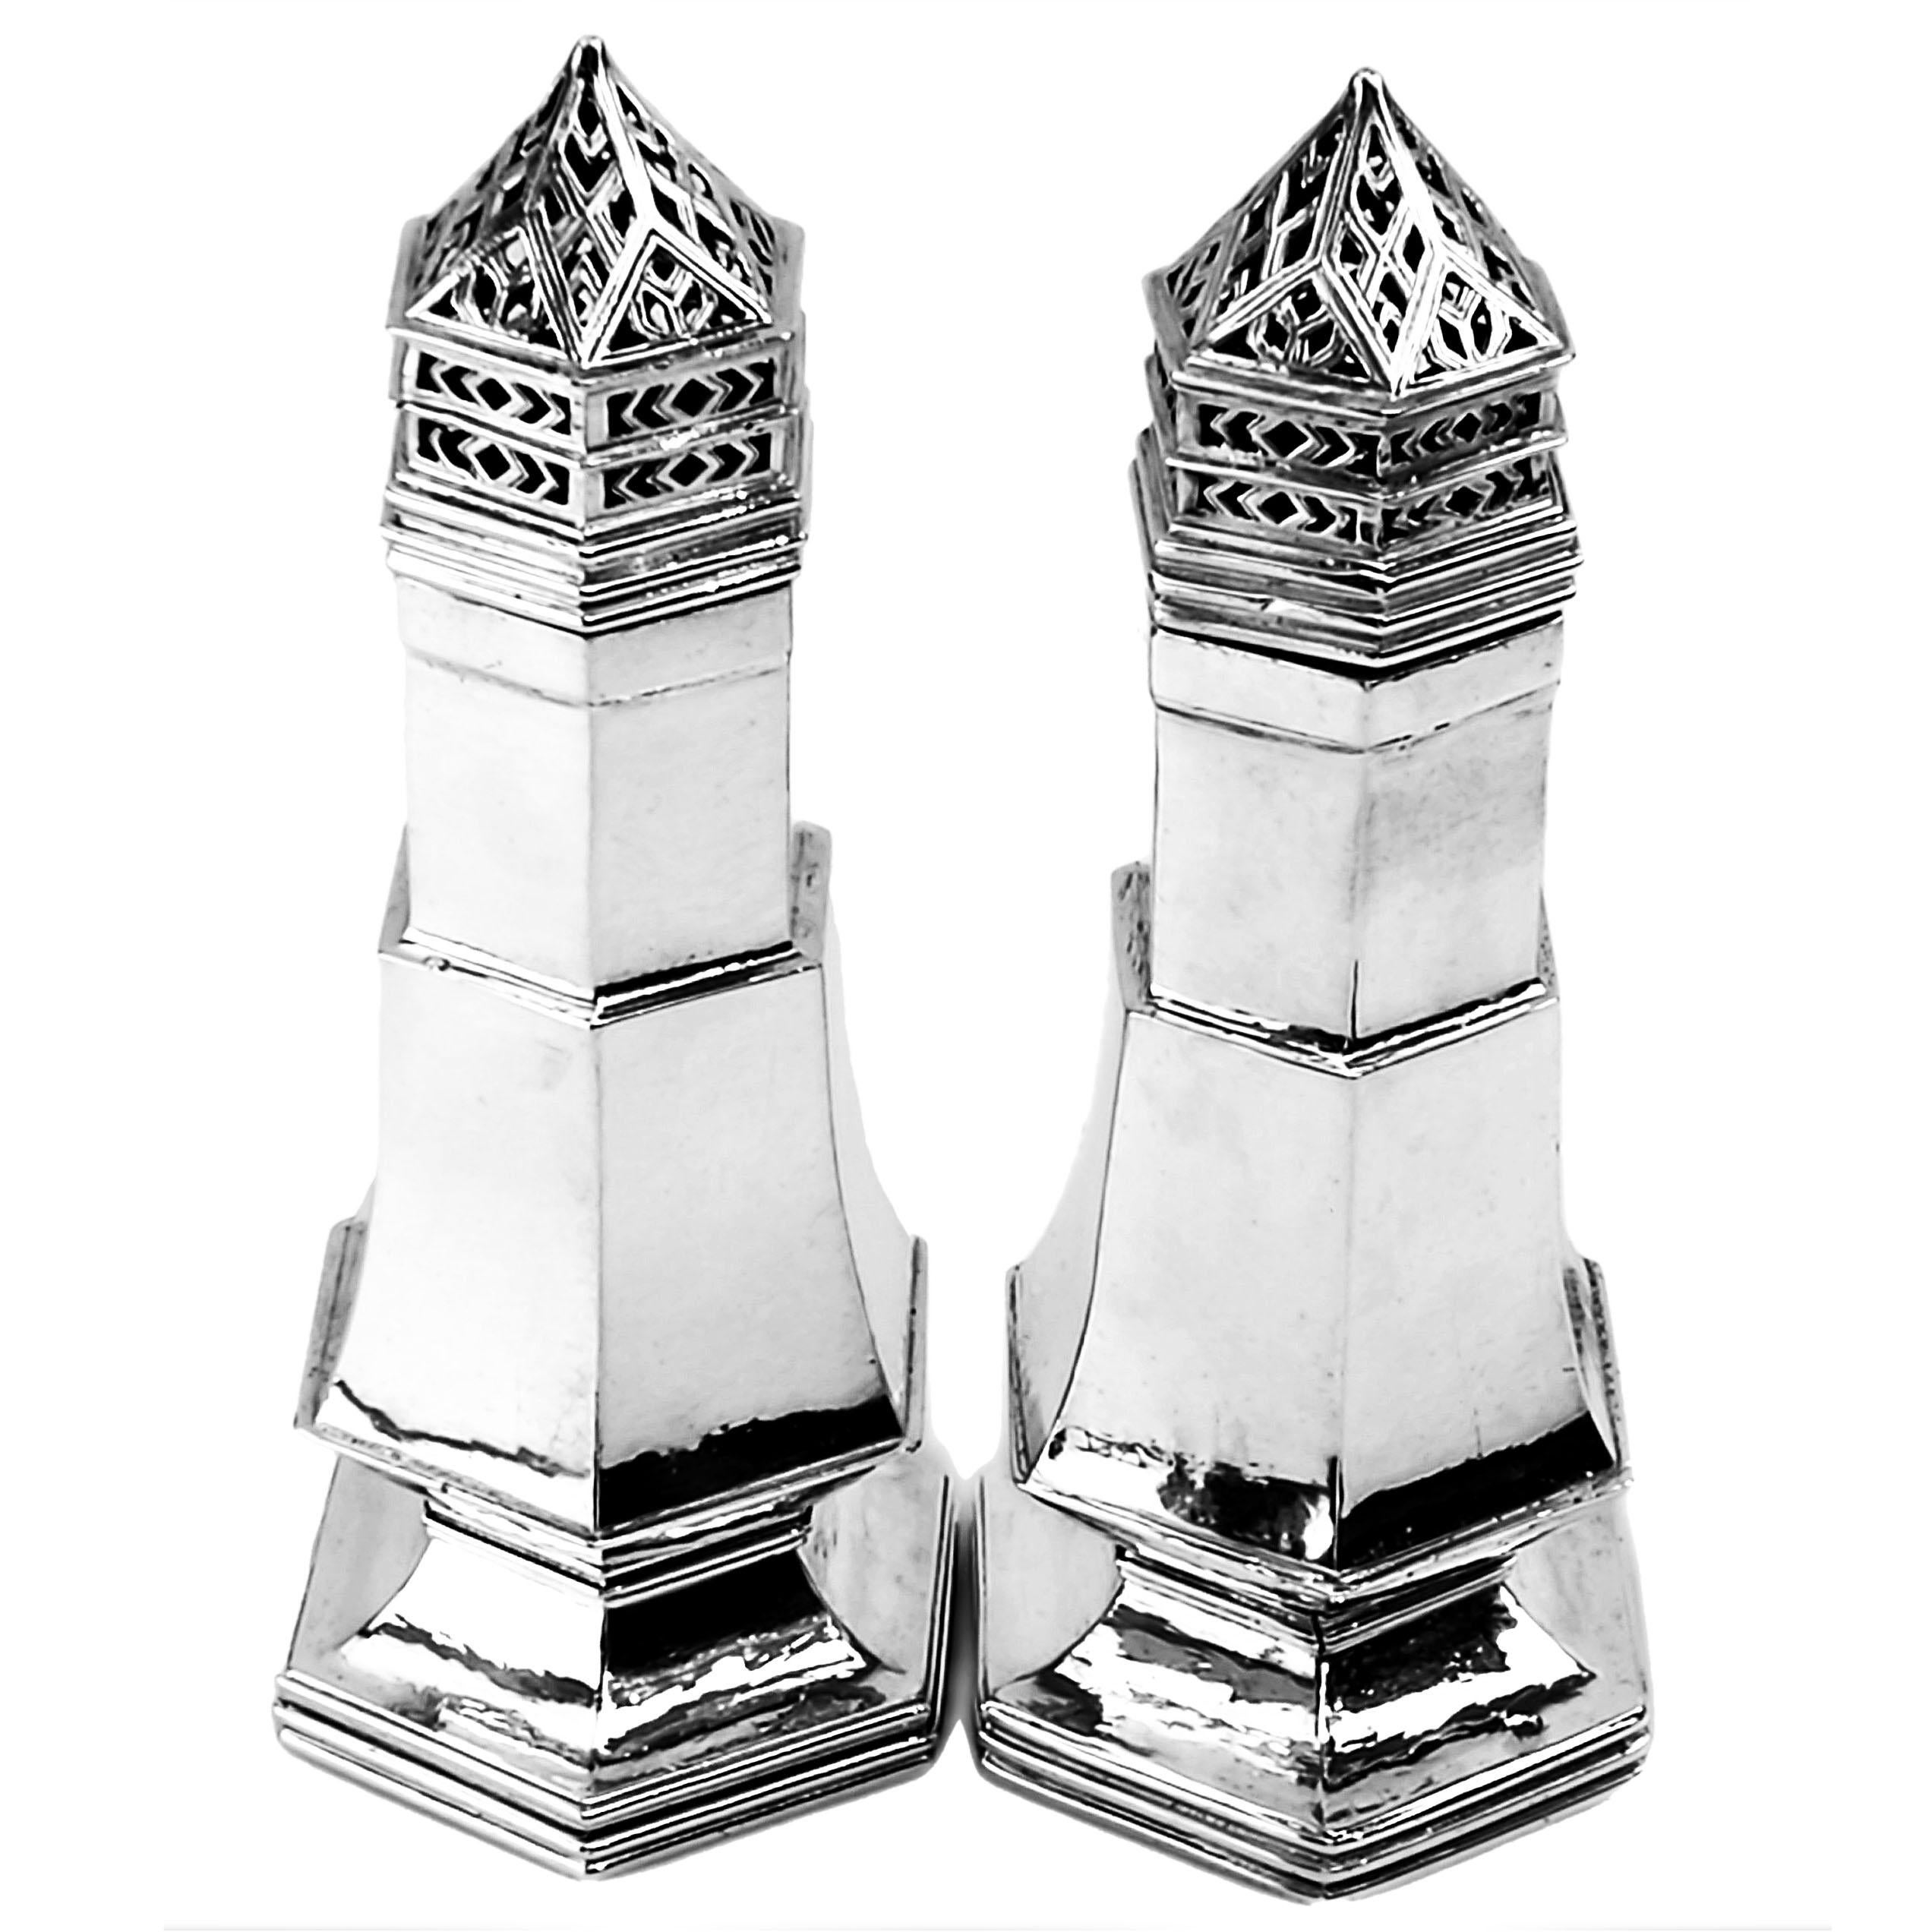 A pair of Arts & Crafts sterling silver sugar casters by the esteemed Silversmith Omar Ramsden. These Sugar Shakers have a tapered hexagonal shape and stand on spread pedestal feet. The exterior of the Casters have a lightly hammered finish. The